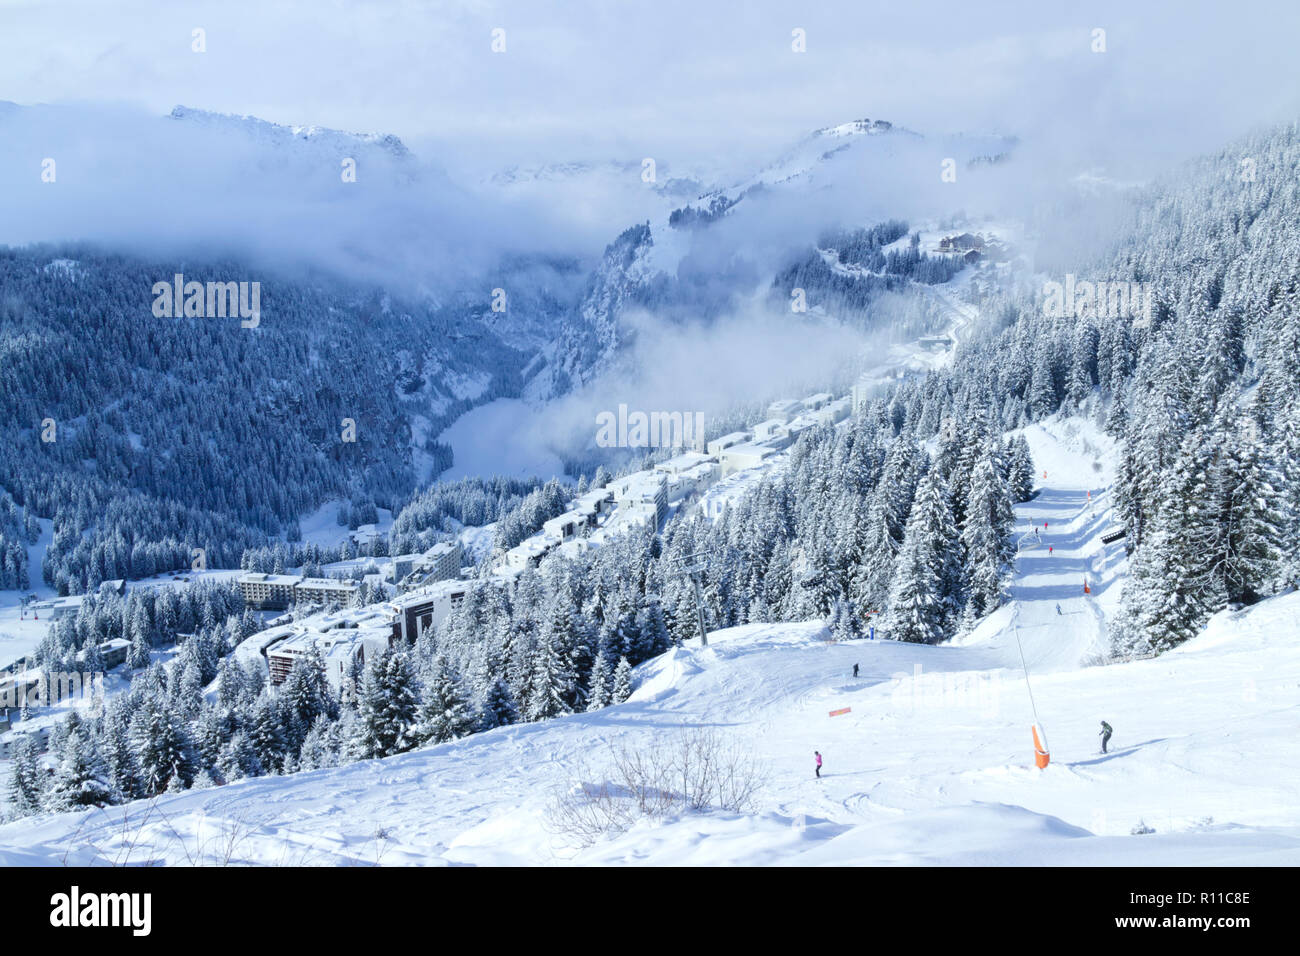 Alpine landscape of ski and snowboard slopes through pine trees going down to winter resort of Flaine, Grand Massif, Alps, France , with low clouds in Stock Photo